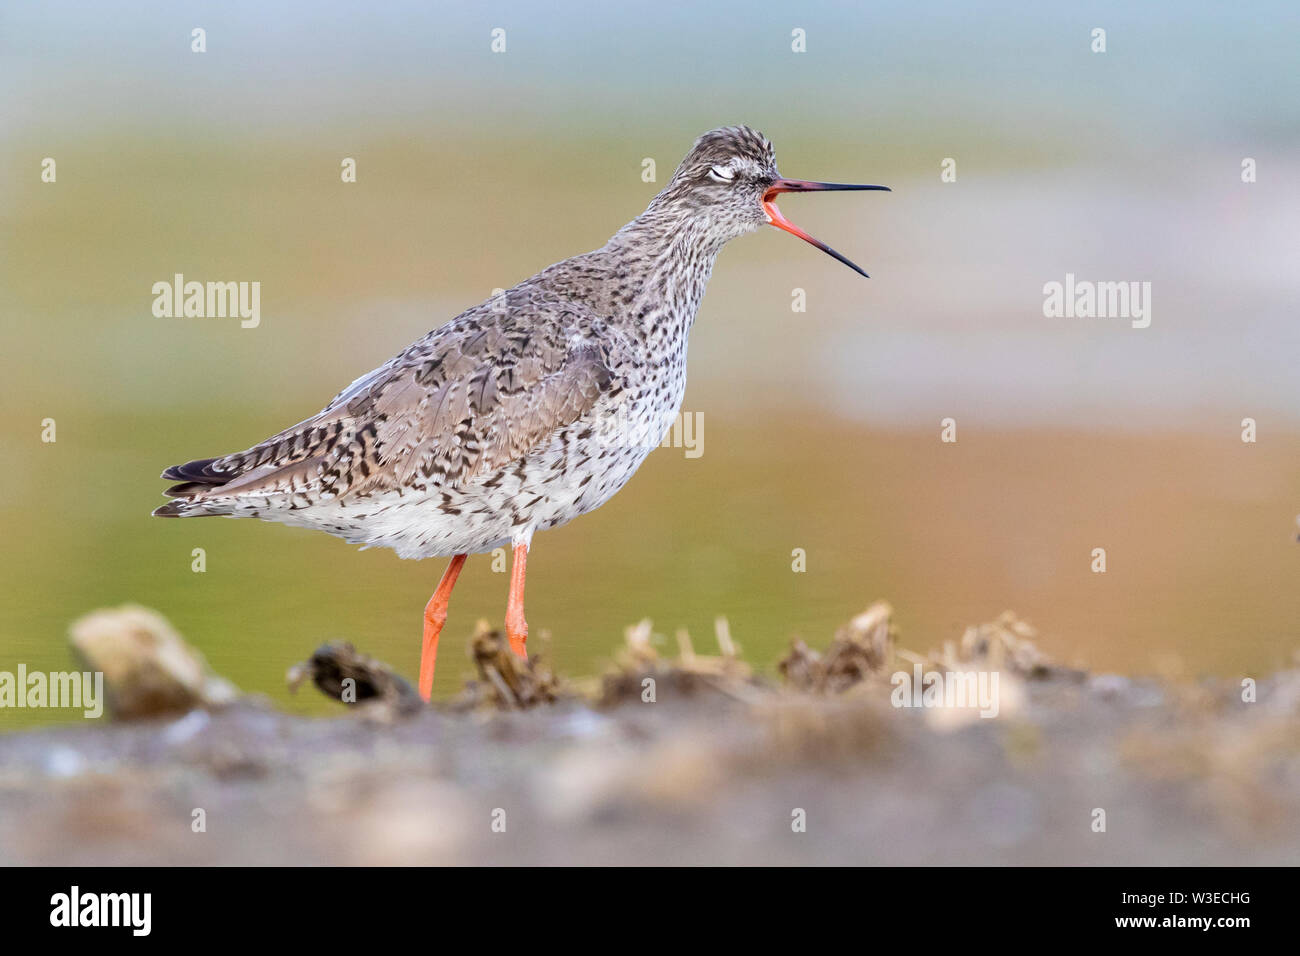 Redshank (Tringa totanus), side view of an adult standing on the ground, Campania, Italy Stock Photo